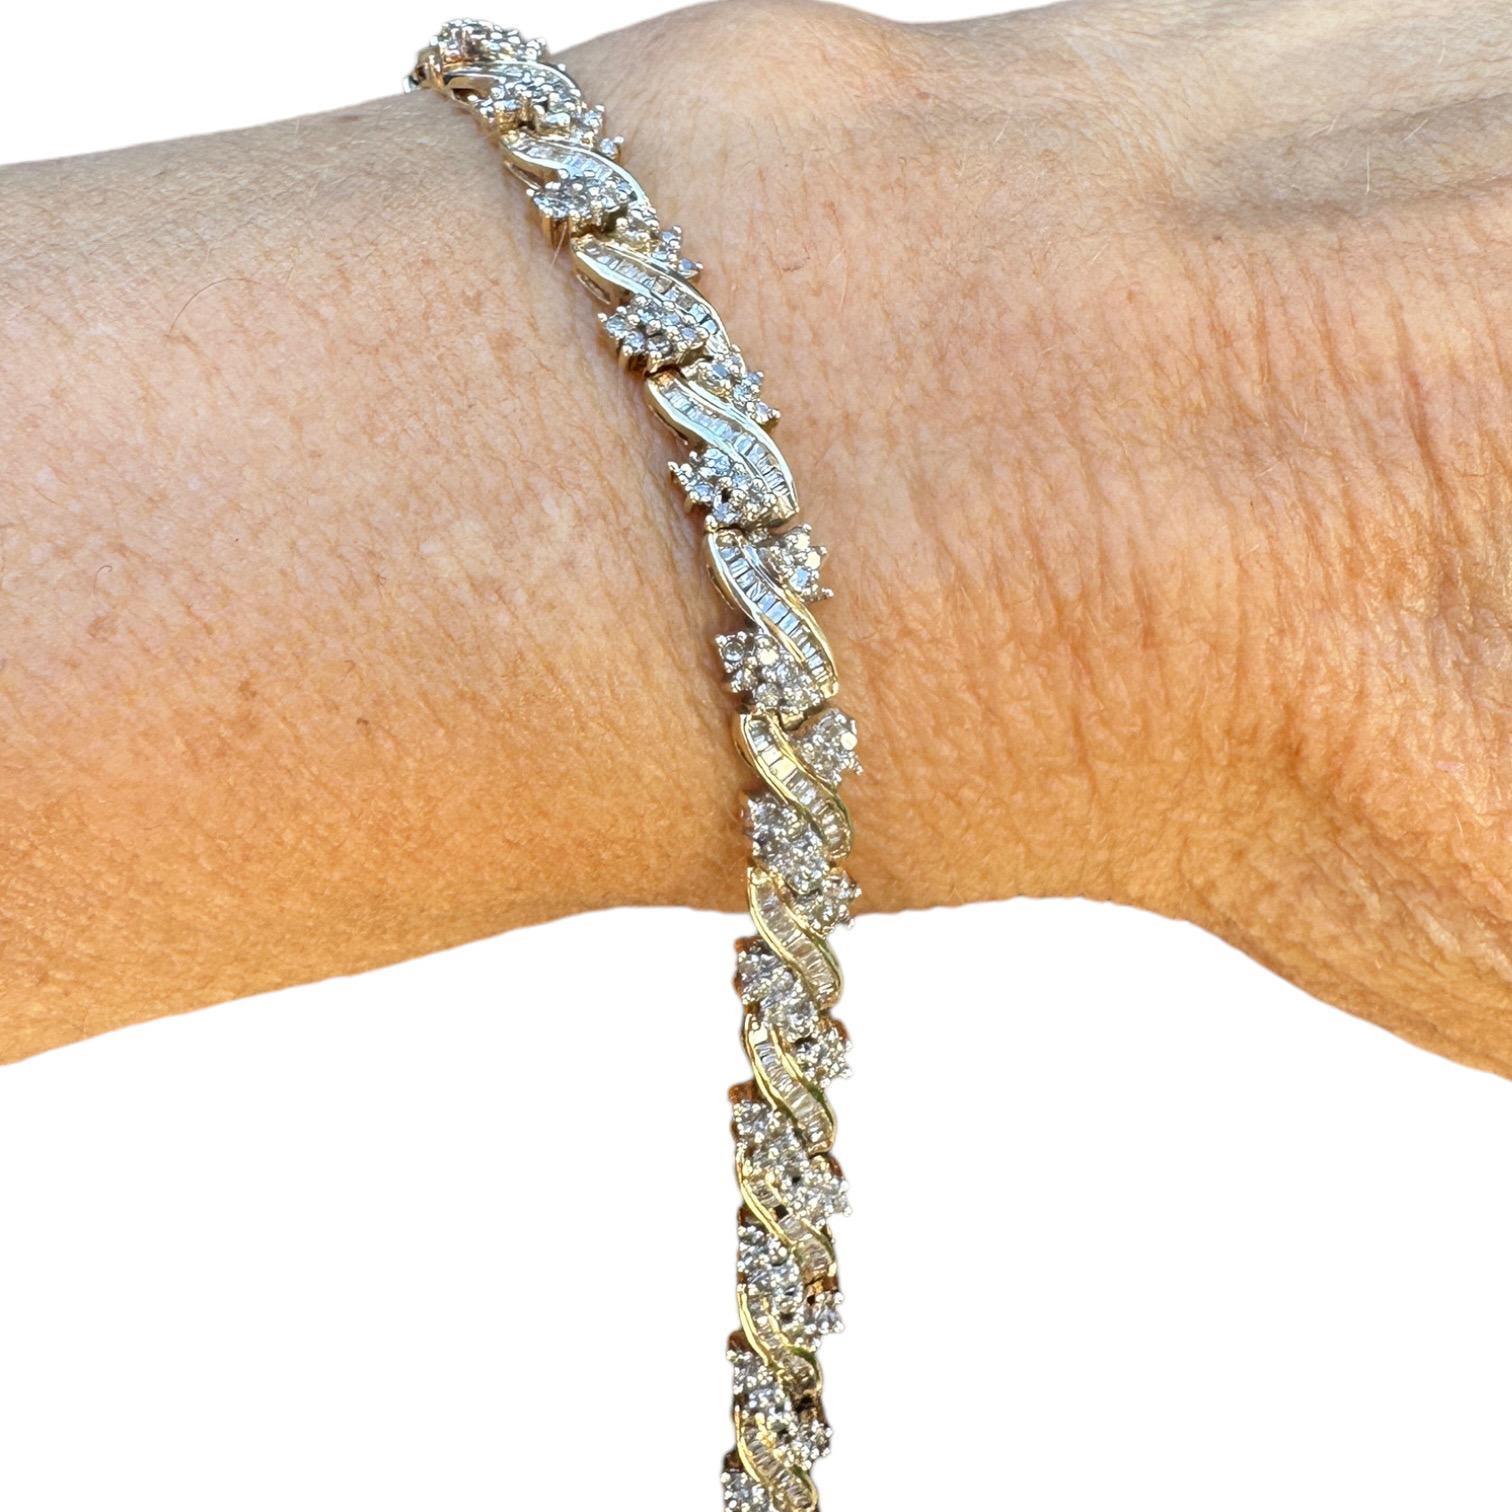 This 10-carat diamond baguette link bracelet is the perfect way to add a brilliant sparkle to any look. Crafted with intricate detail, this cluster diamond link bracelet will make anyone sparkle.

10-karat yellow gold diamond encrusted link